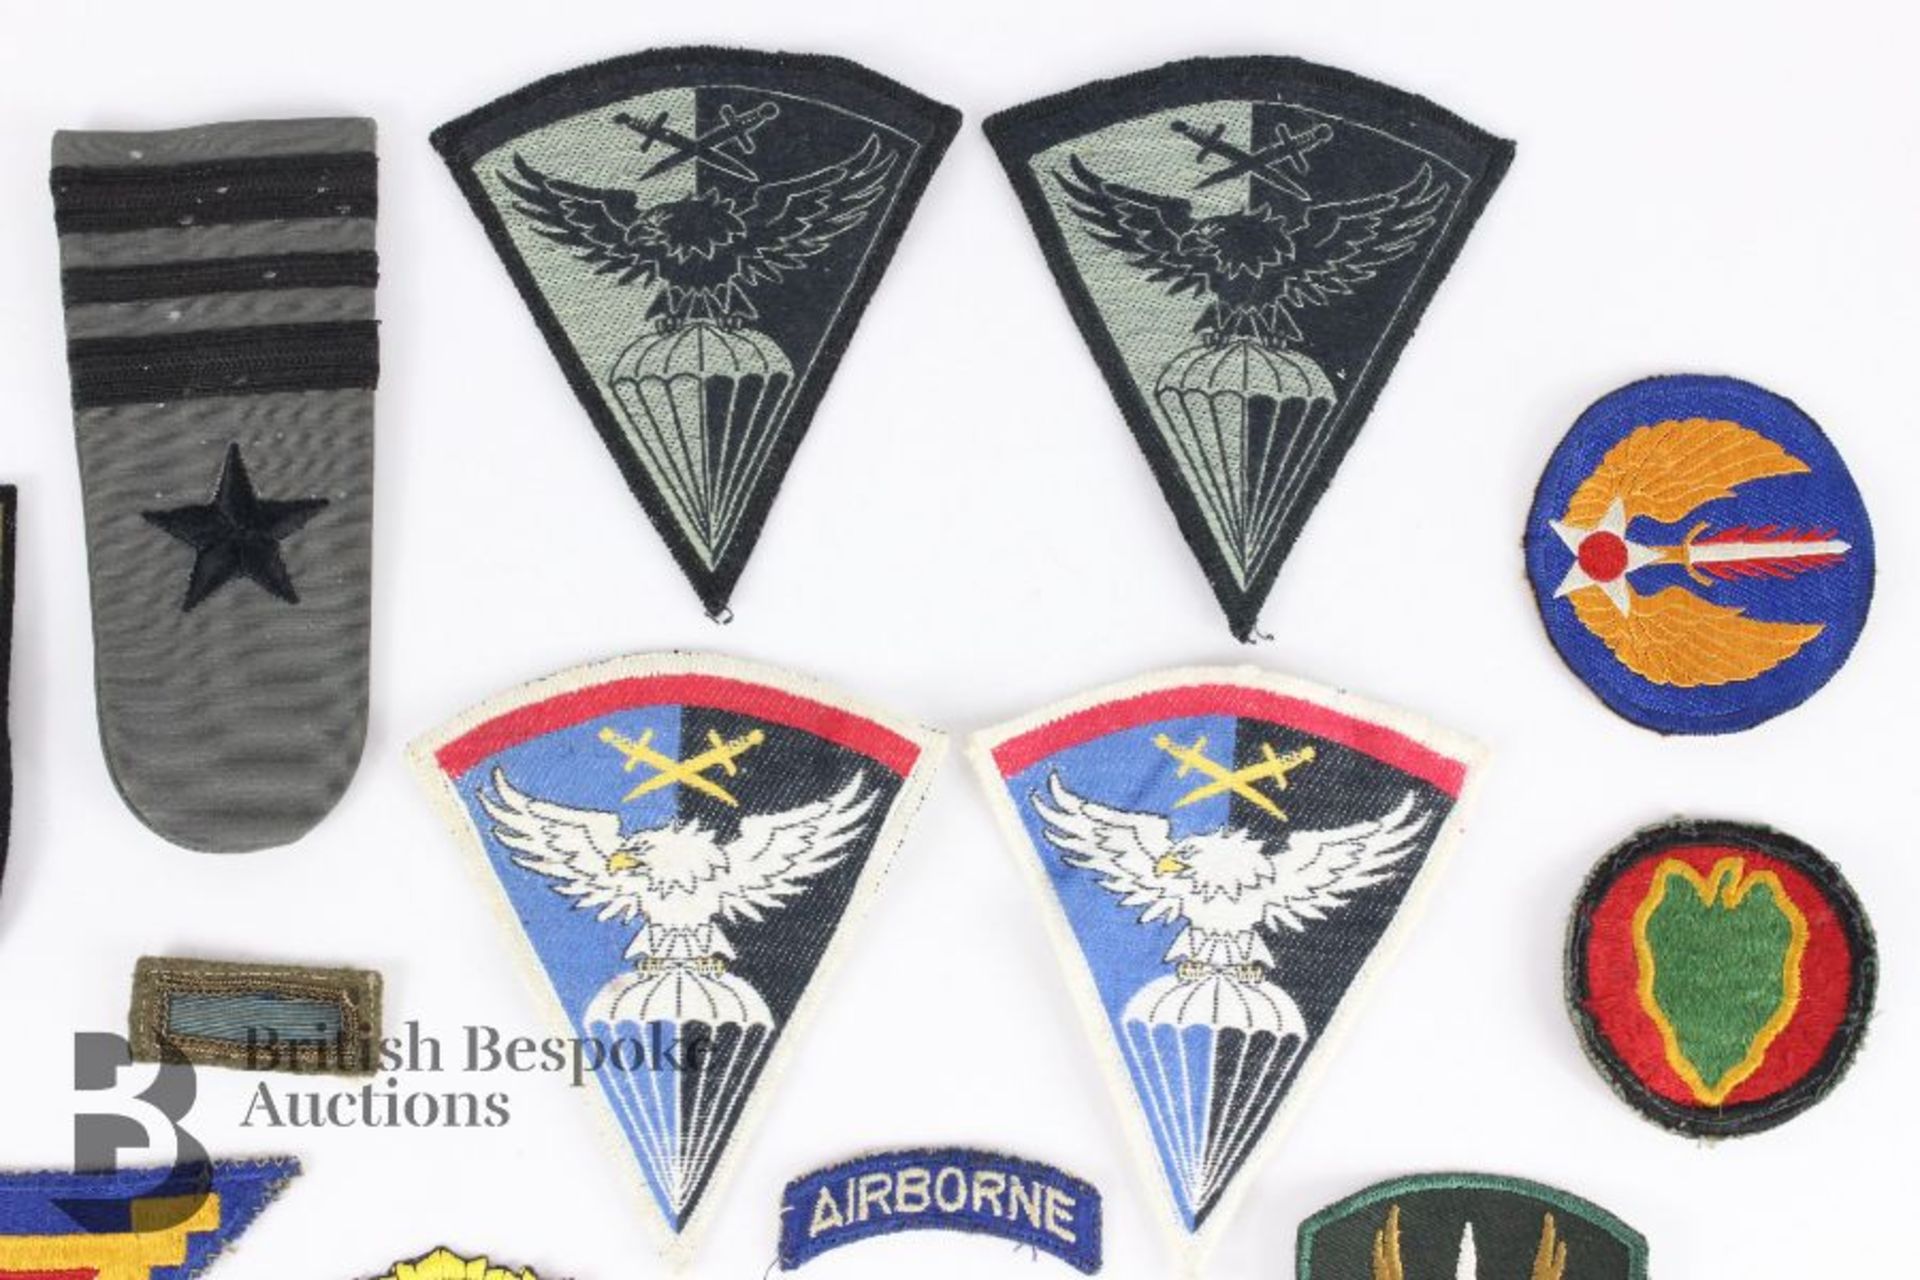 Royal Air Force and Air Training Corps Insignia and Metal Badges, Canadian Airborne Badges - Image 7 of 11